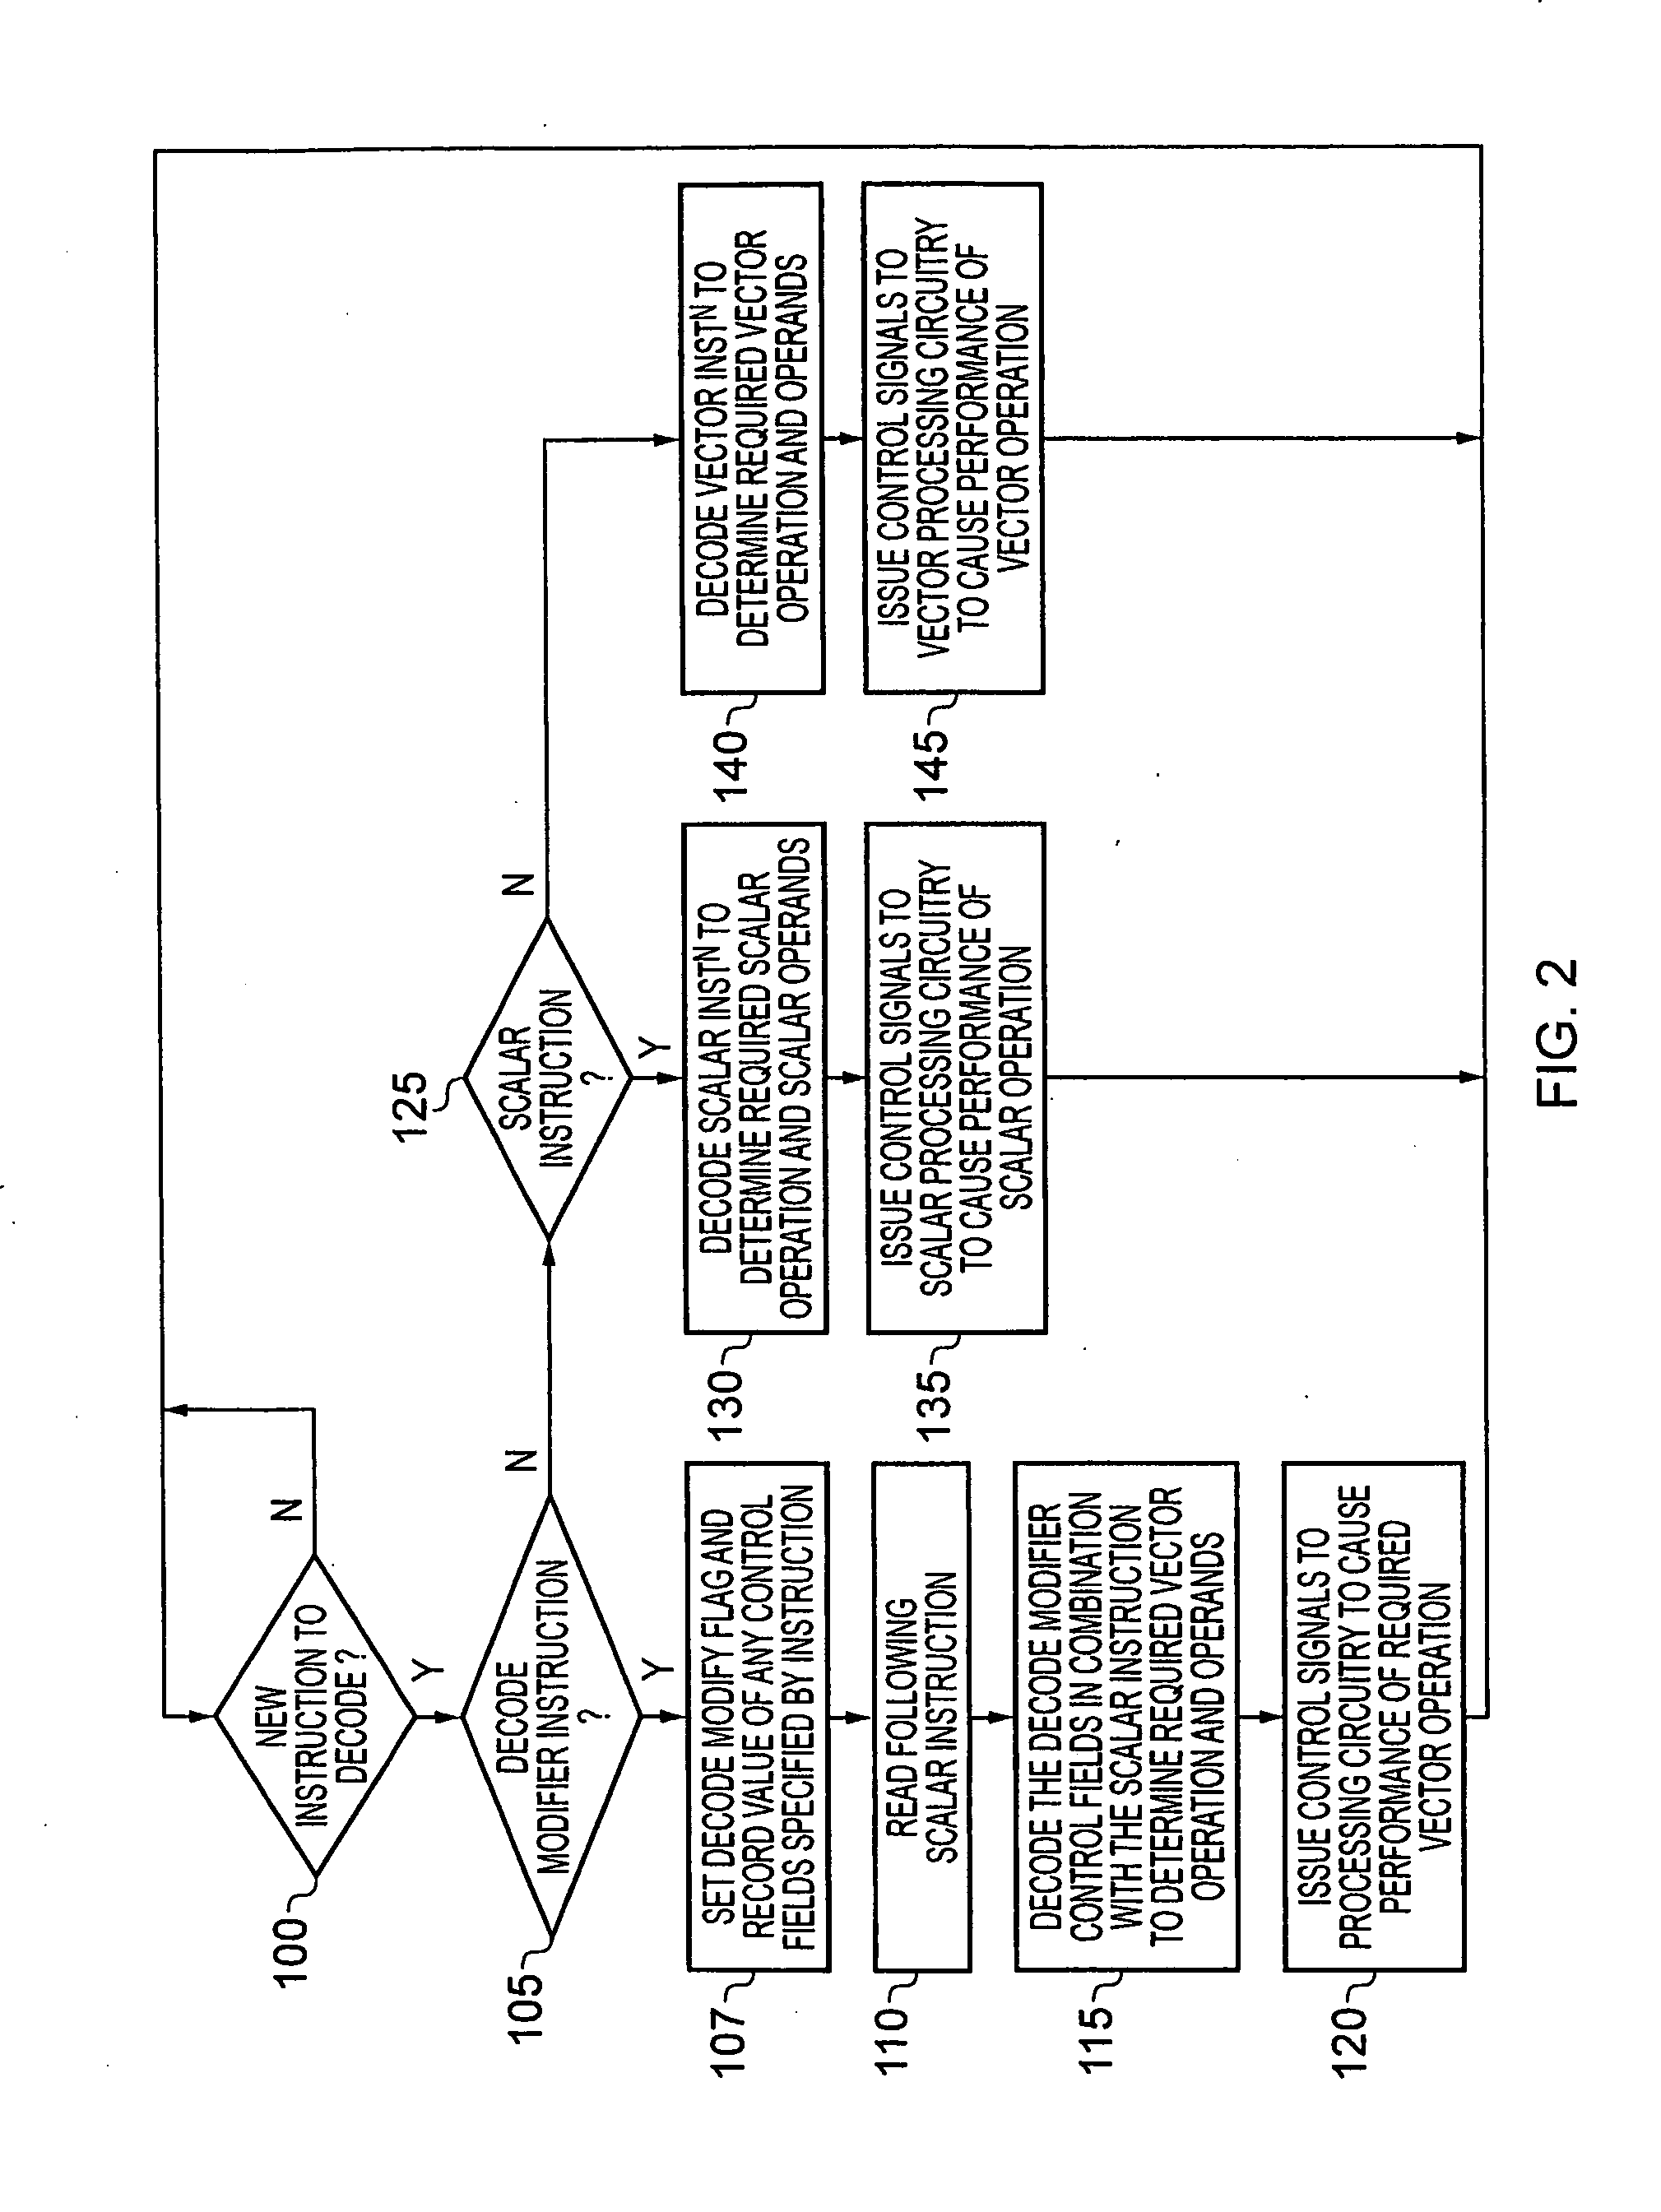 Data processing apparatus and method for performing vector operations